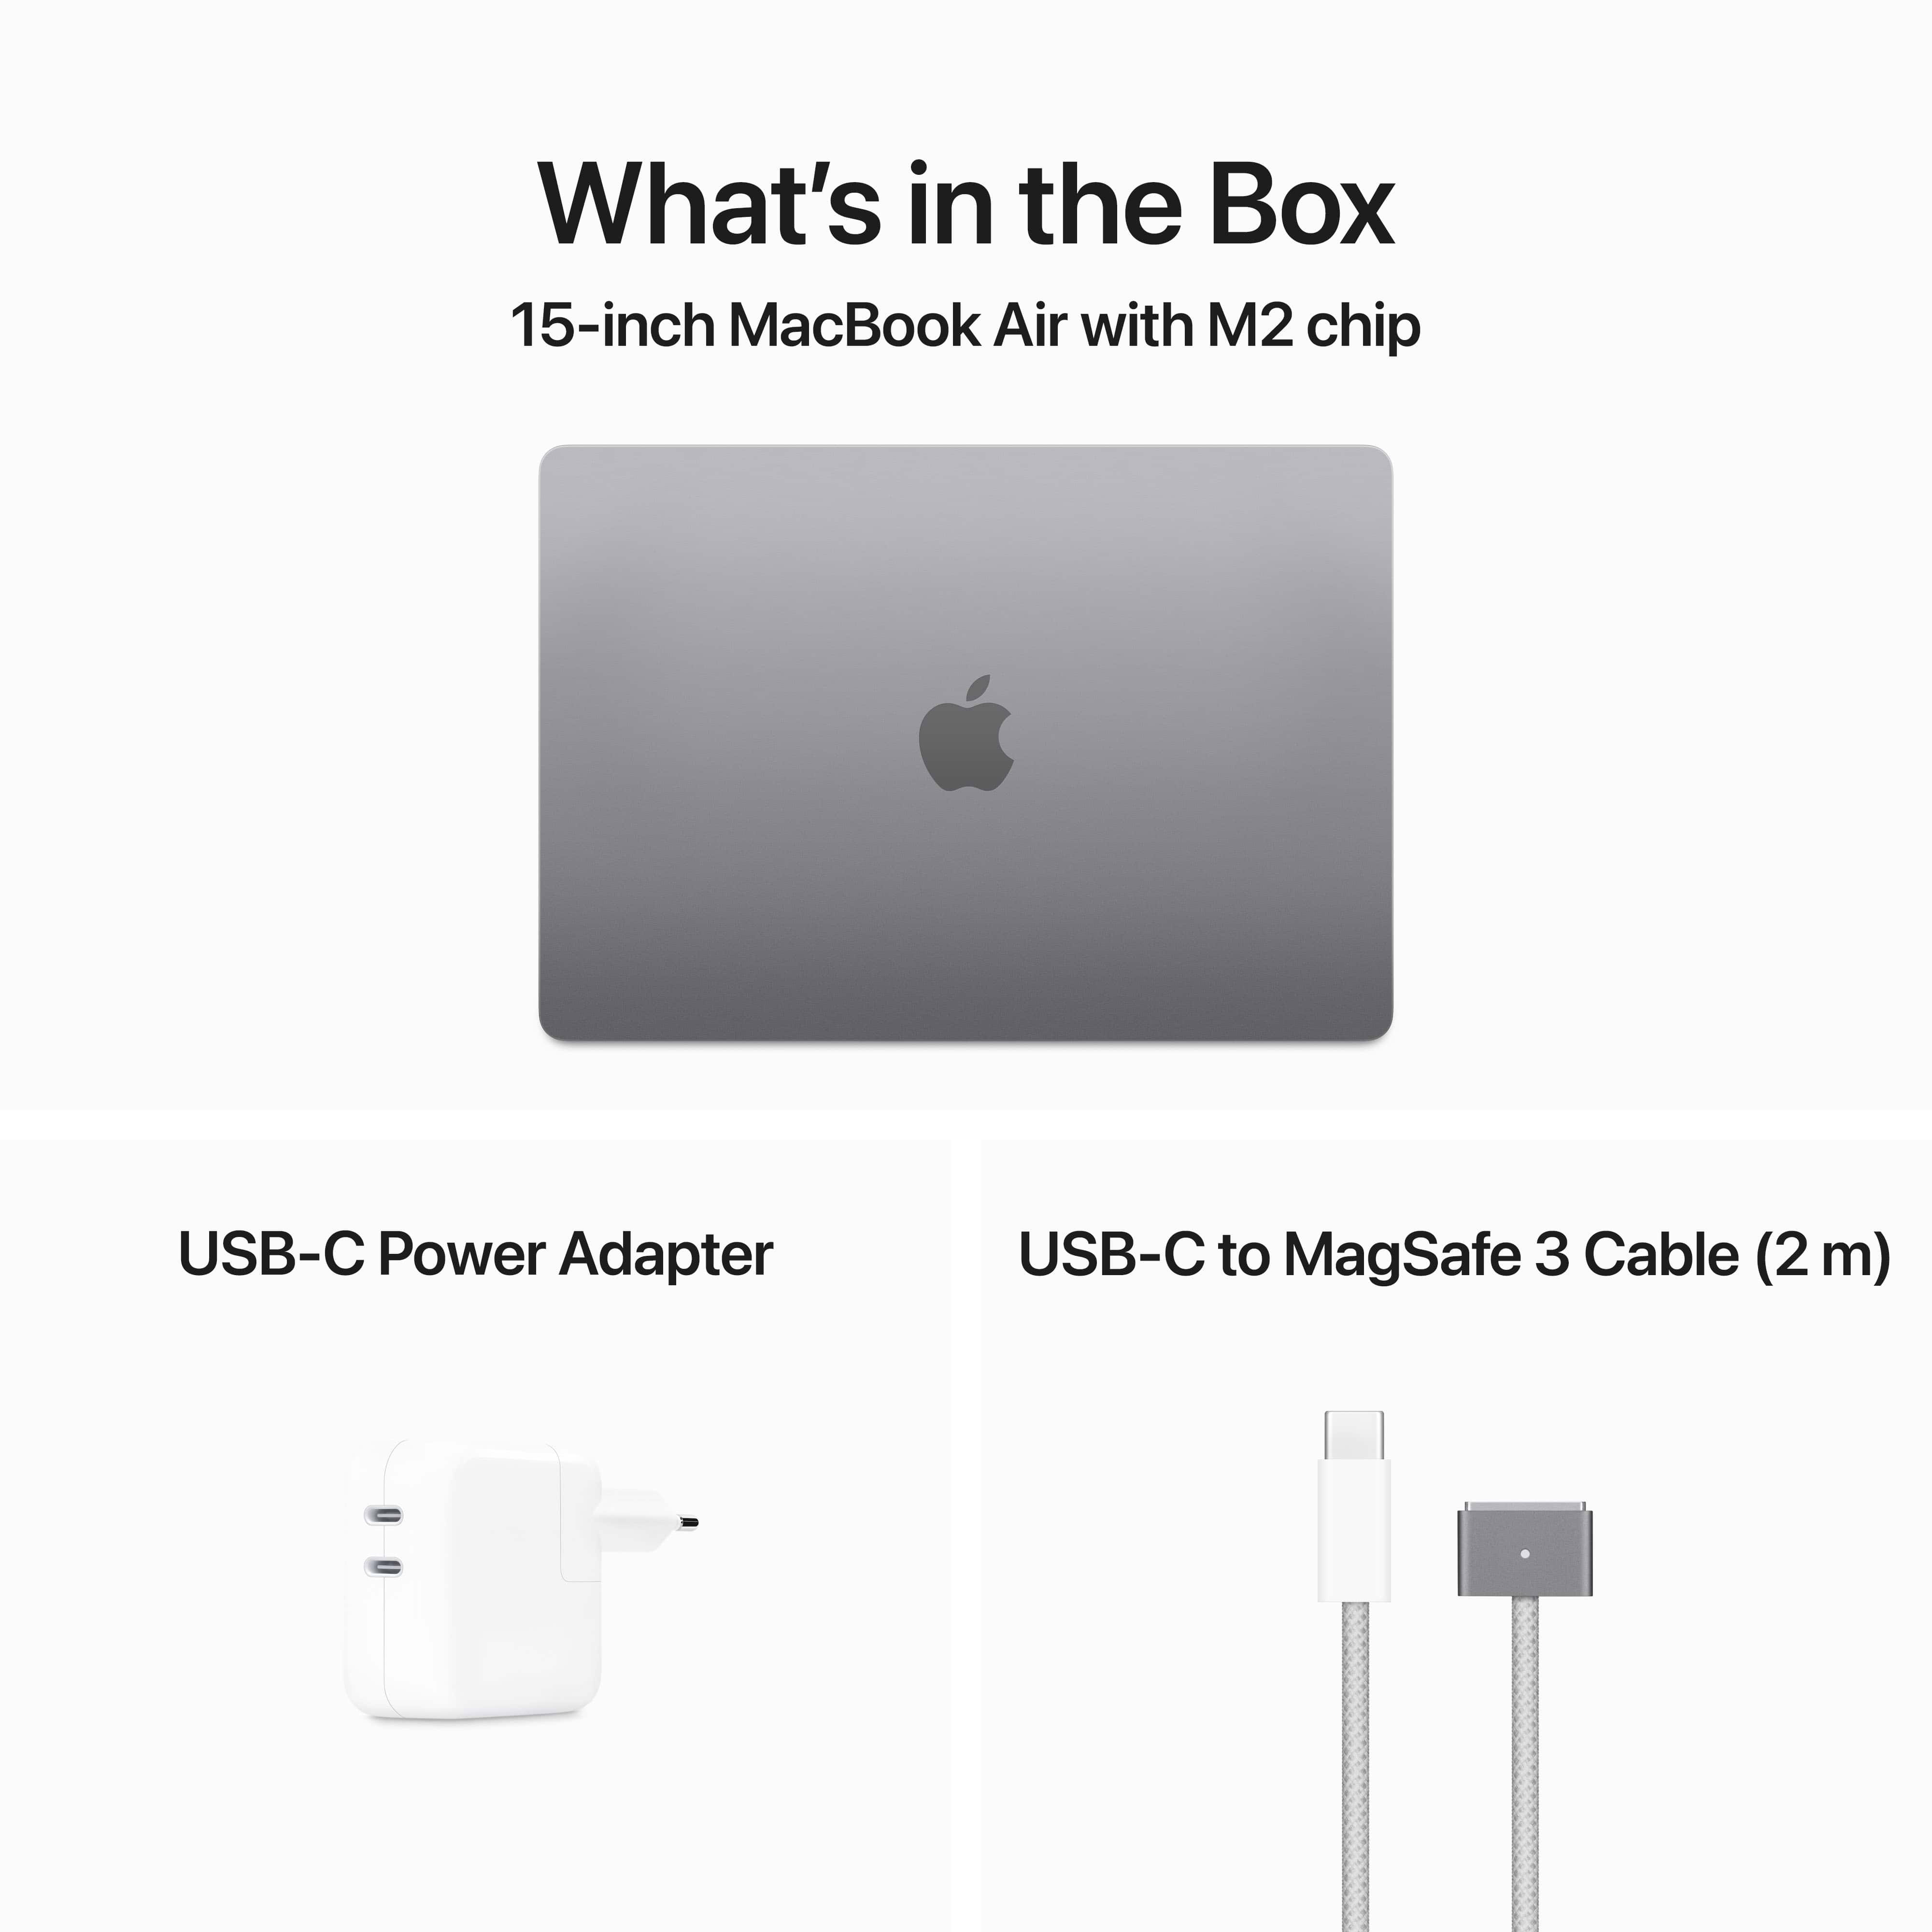 '15-inch MacBook Air: Apple M2 chip with 8-core CPU and 10-core GPU 256GB - Space Grey  מחשב אייקון  נייד'